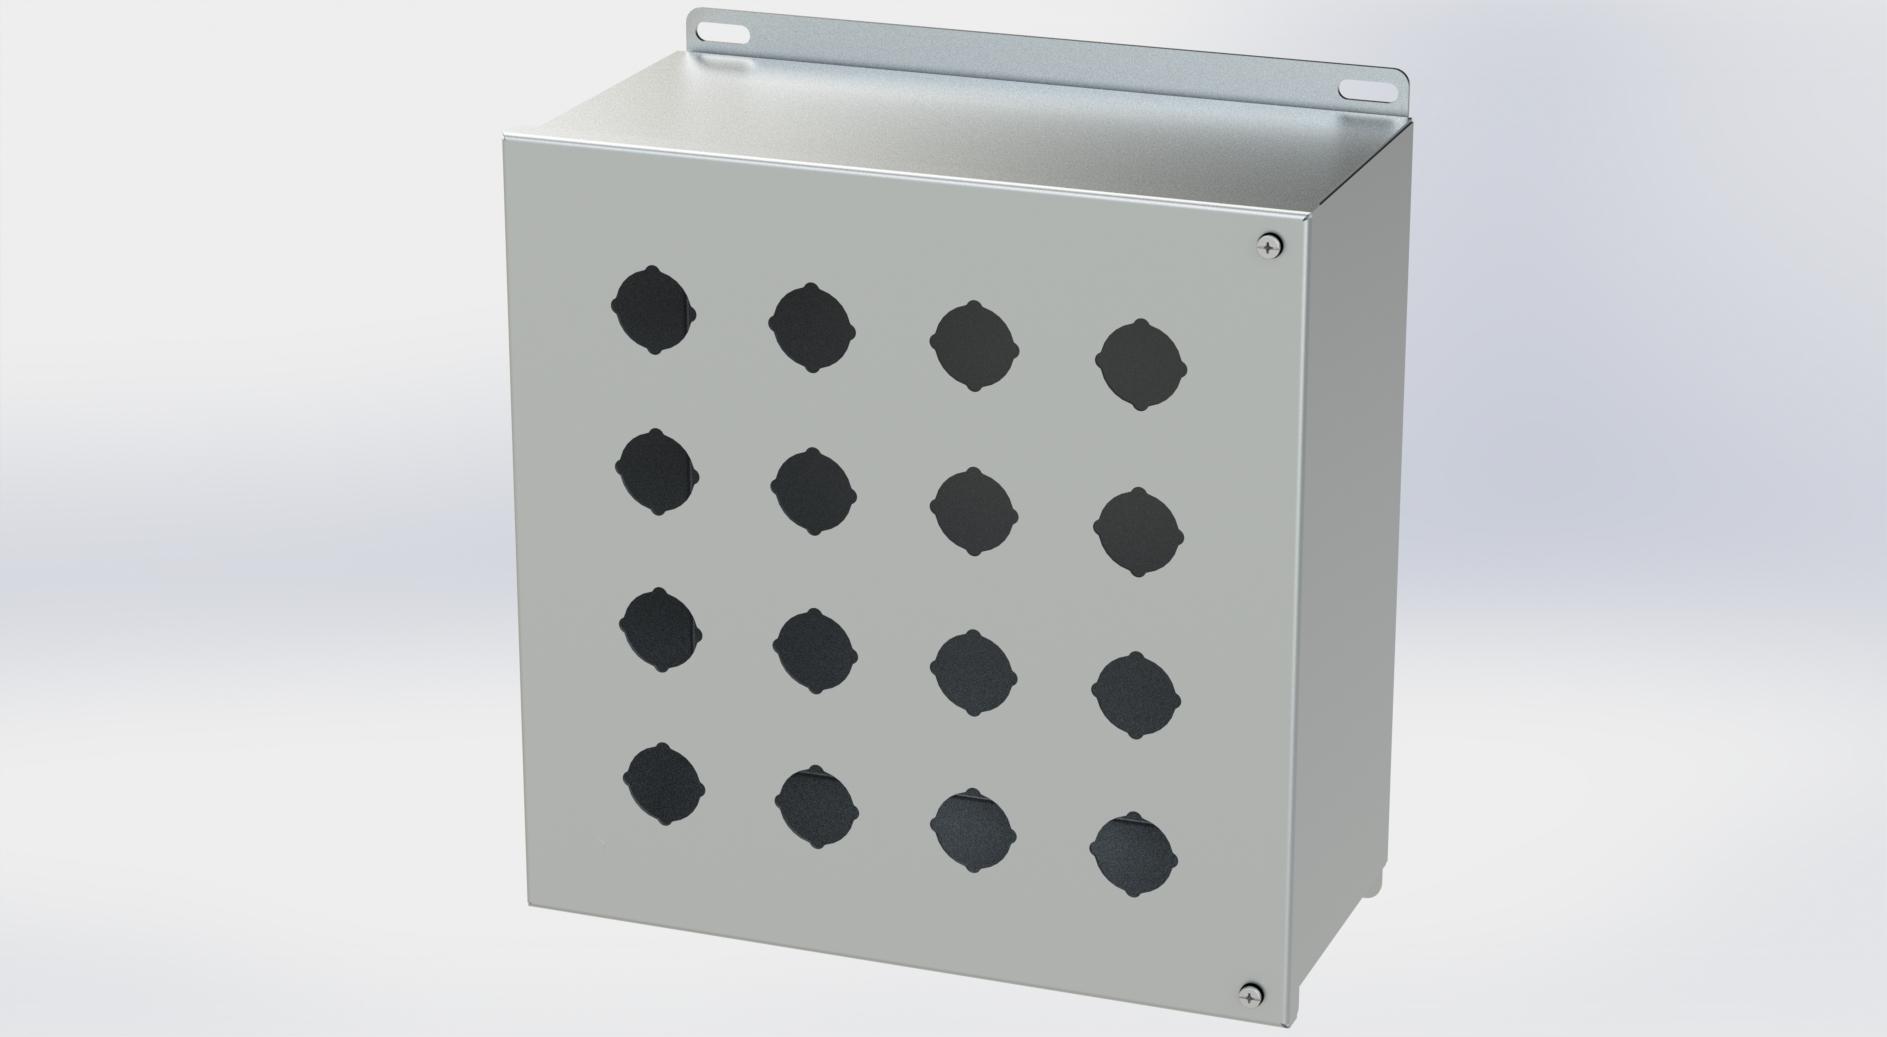 Saginaw Control SCE-16PBHSS6 S.S. PB Enclosure, Height:12.13", Width:12.00", Depth:6.00", #4 brushed finish on all exterior surfaces. Optional sub-panels are powder coated white.